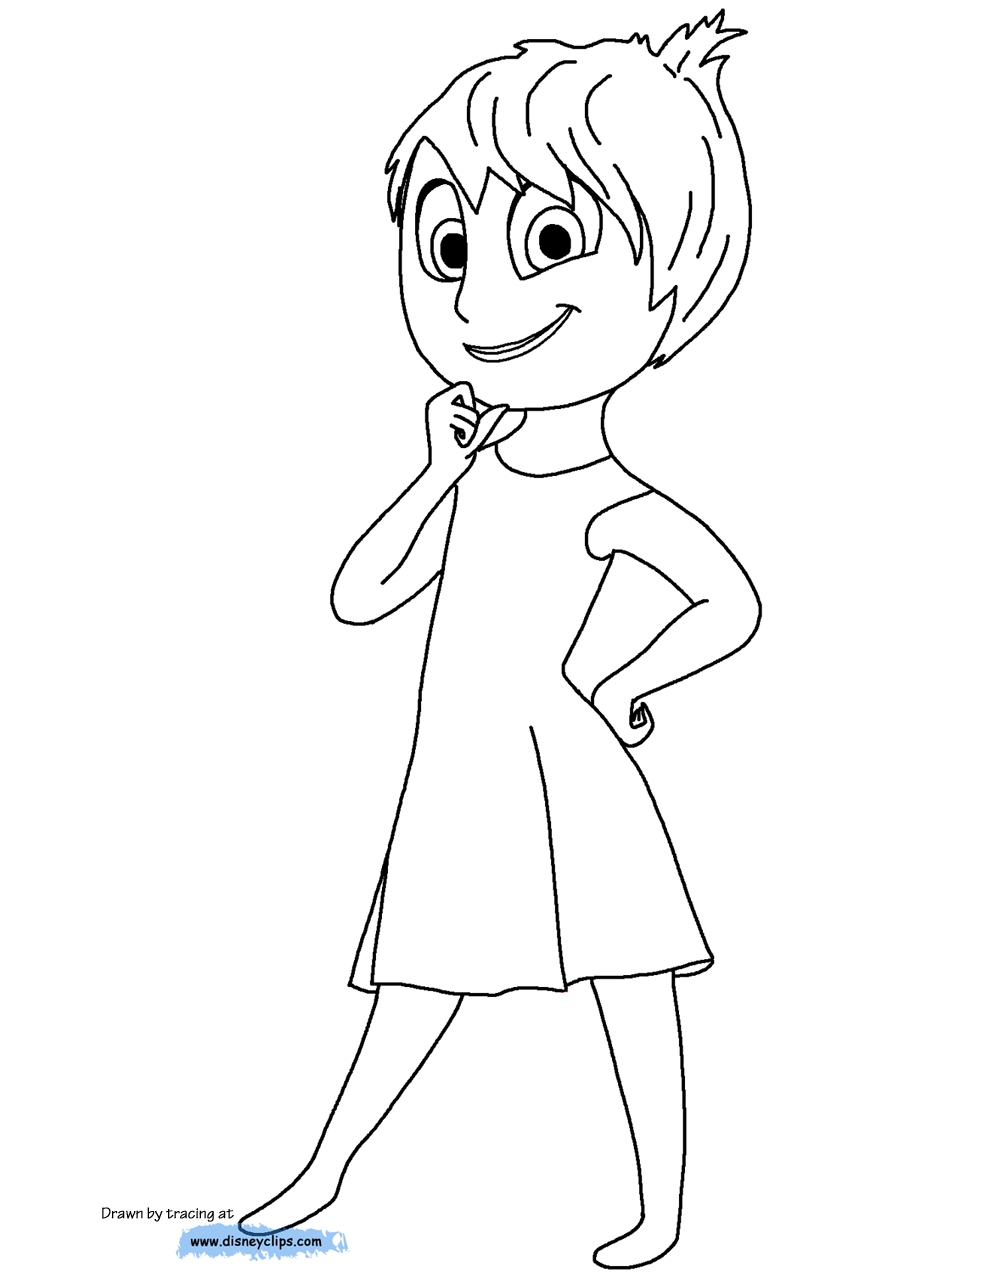 Inside Out Coloring Pages | Disneyclips.com